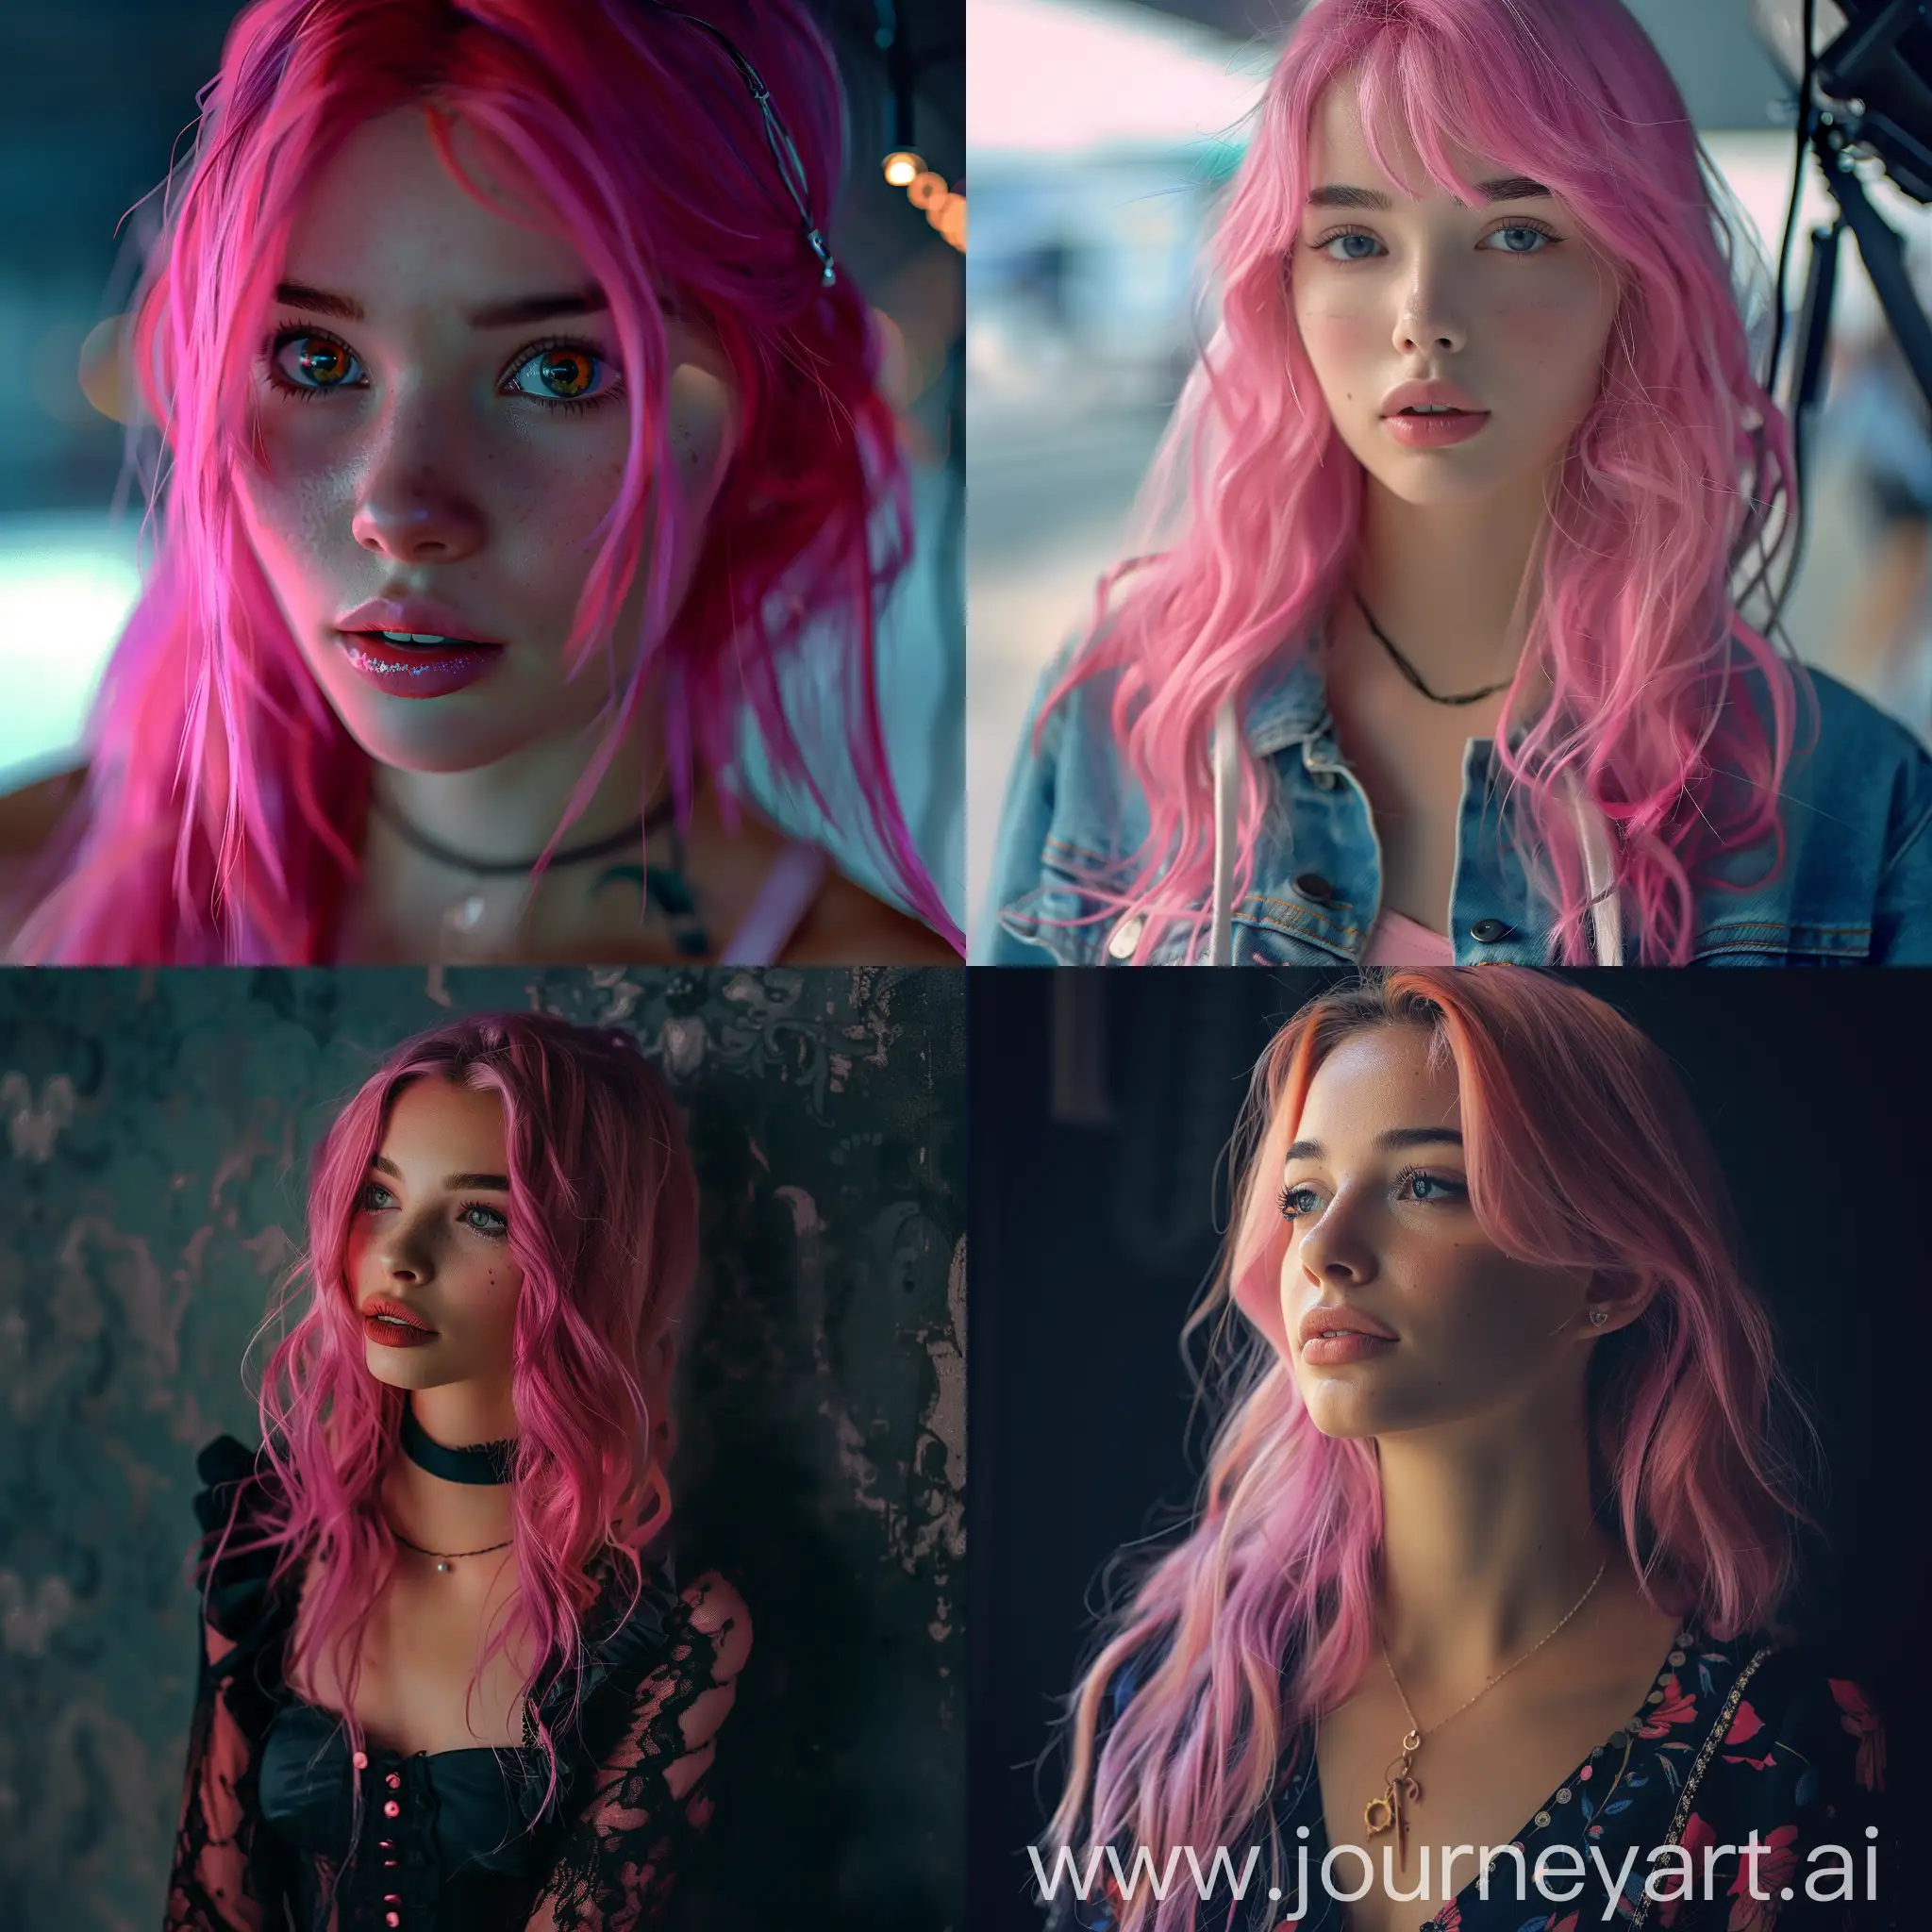 21 years old influencer girl, pink hair, cinematic 8k